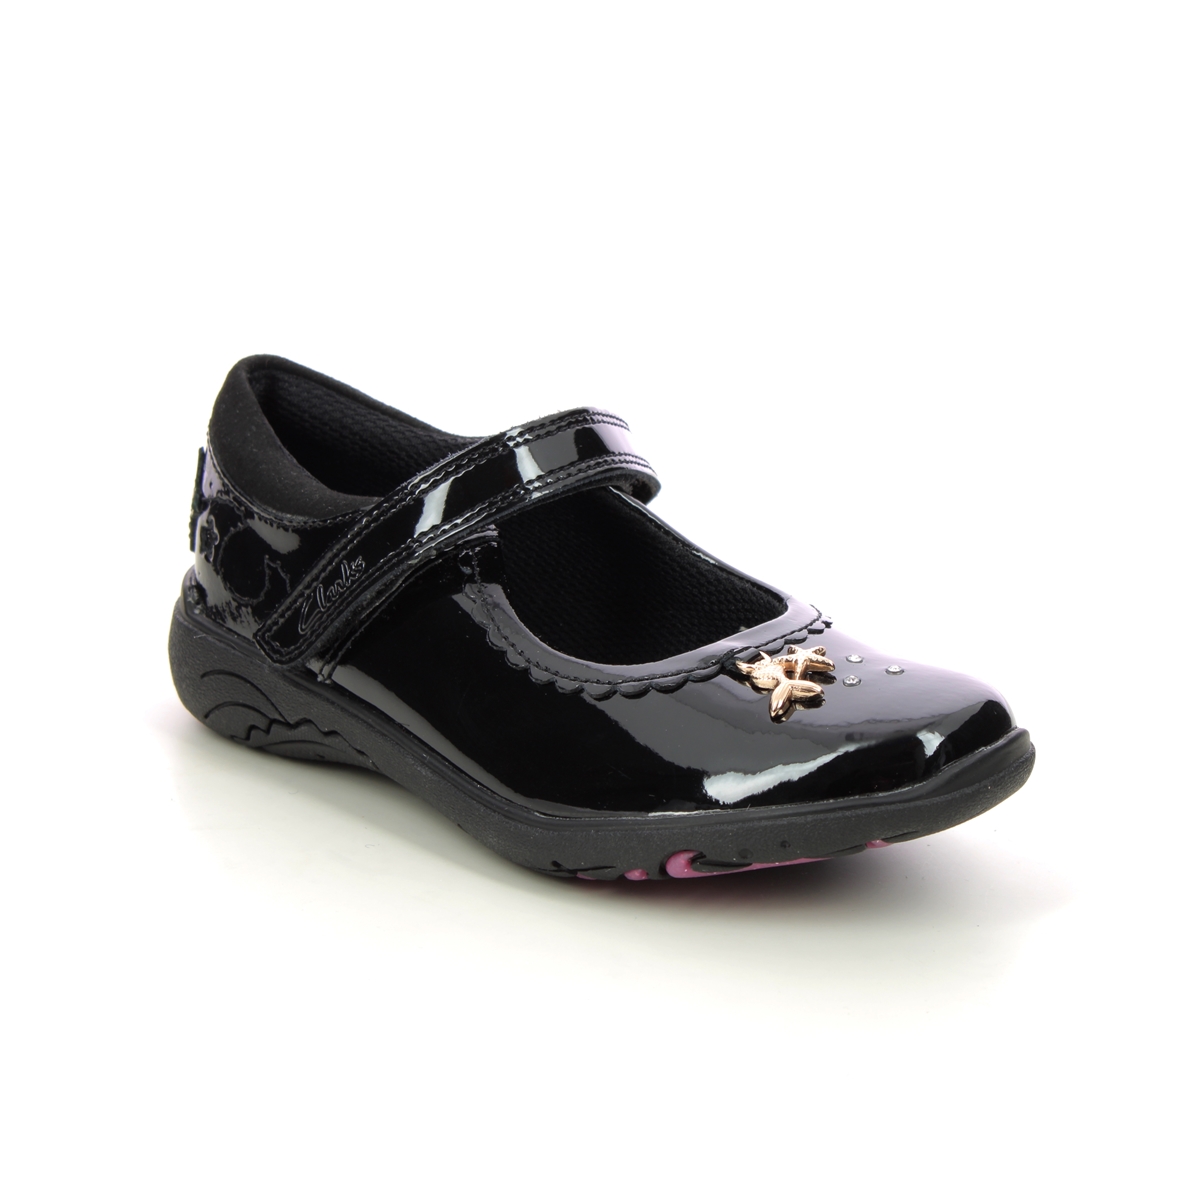 Clarks Relda Sea K Mary Jane Black Patent Kids Girls School Shoes 722416F In Size 11 In Plain Black Patent F Width Fitting Regular Fit For School For